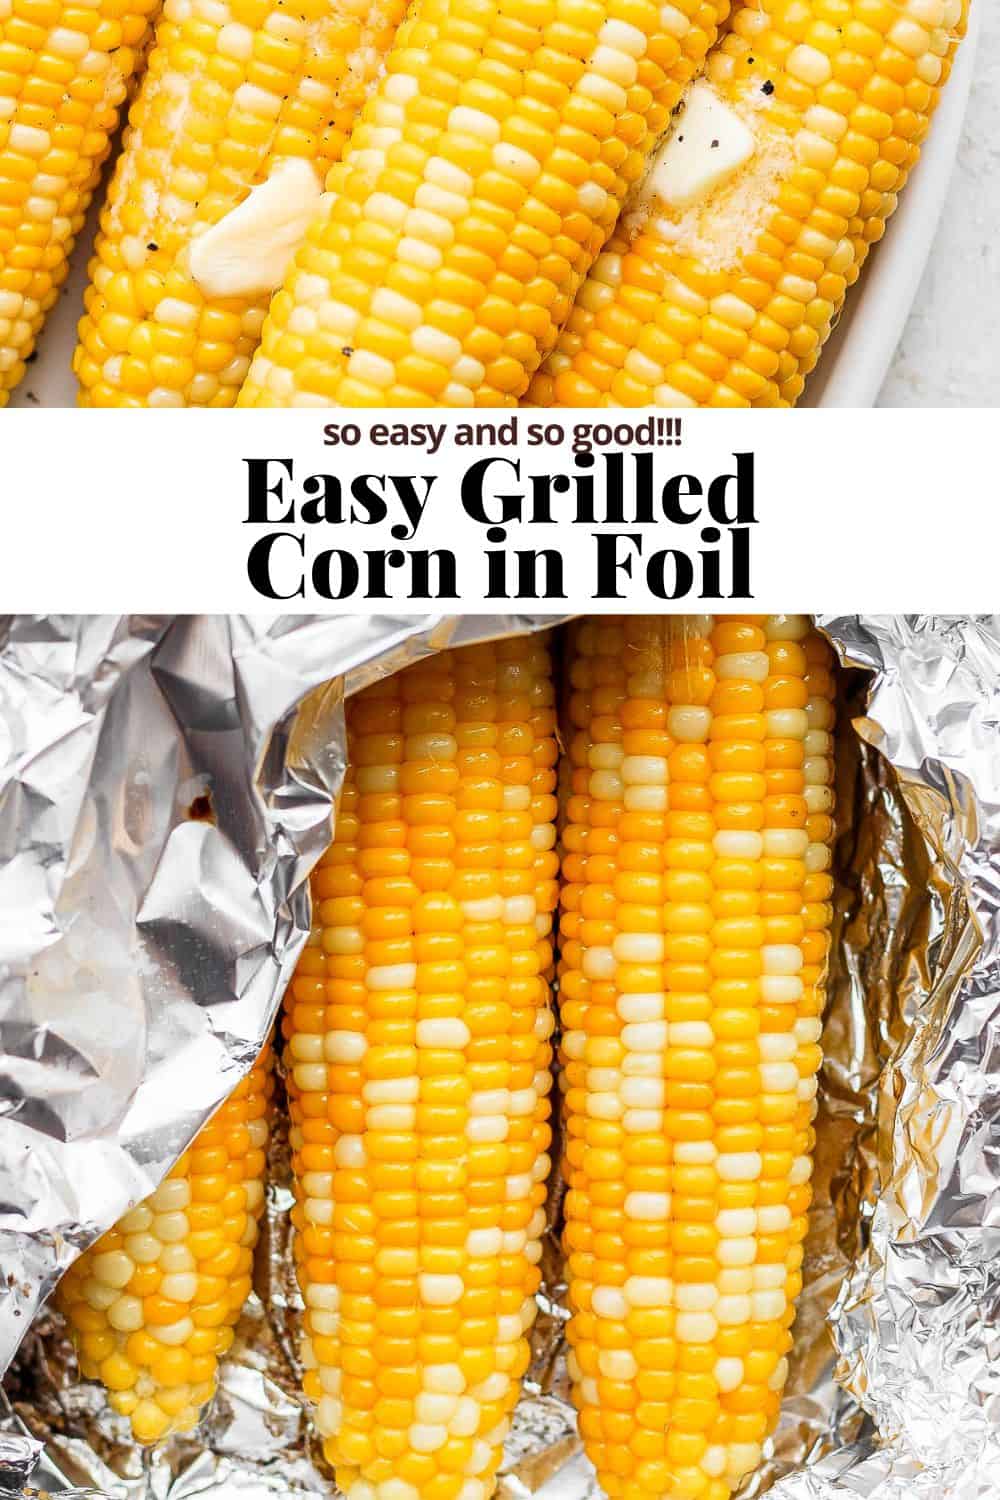 Pinterest image showing ears of corn with melted butter on the top of the image and the corn in foil on the bottom of the image.